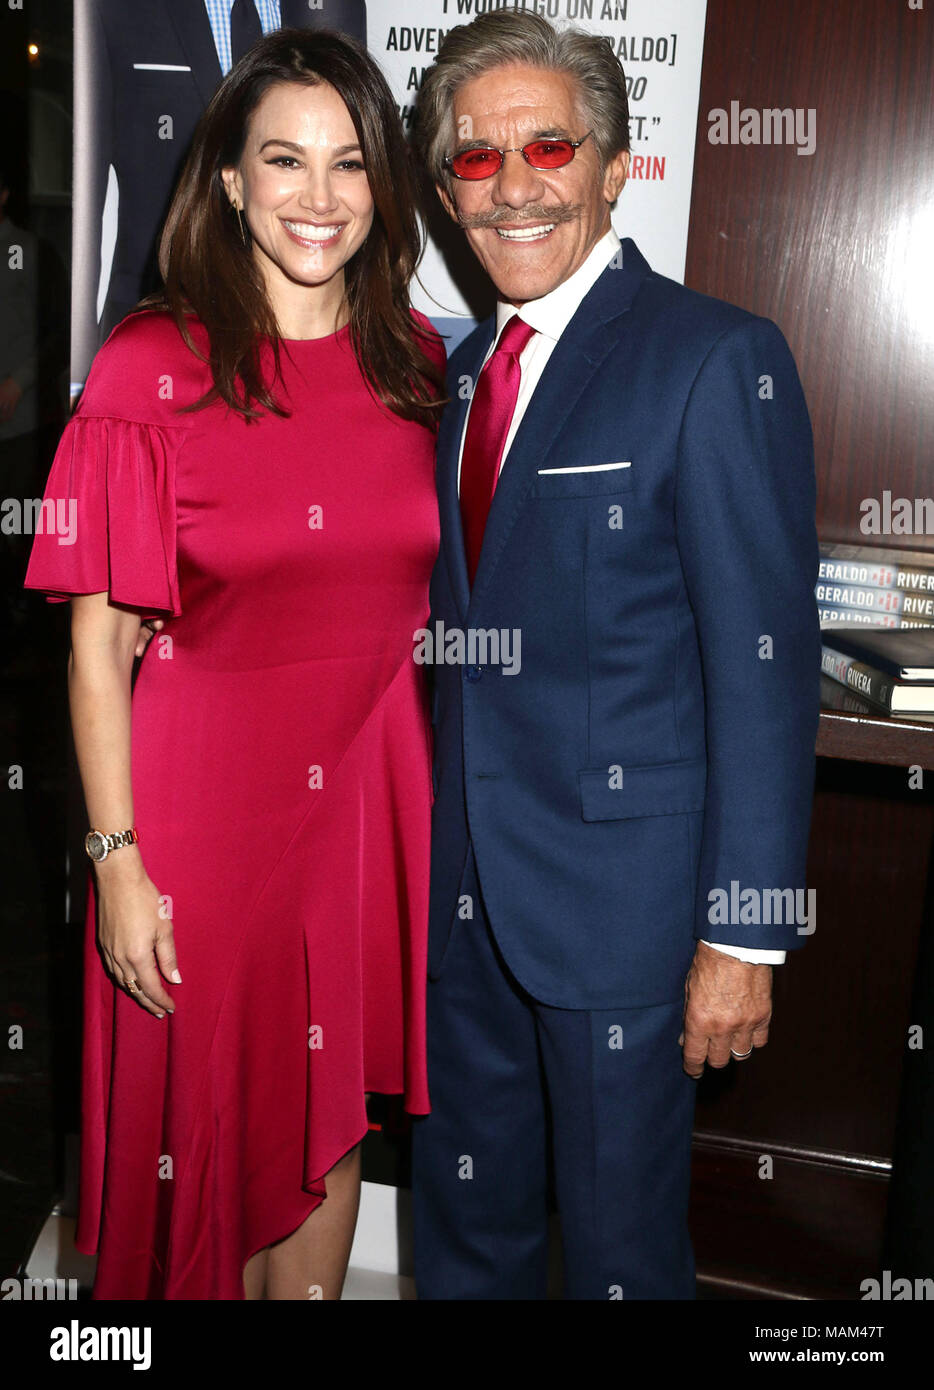 New York City, New York, USA. 2nd Apr, 2018. News personality GERALDO  RIVERA and his wife ERICA MICHELLE LEVY attend the book party hosted by  Sean Hannity to celebrate the publication of '